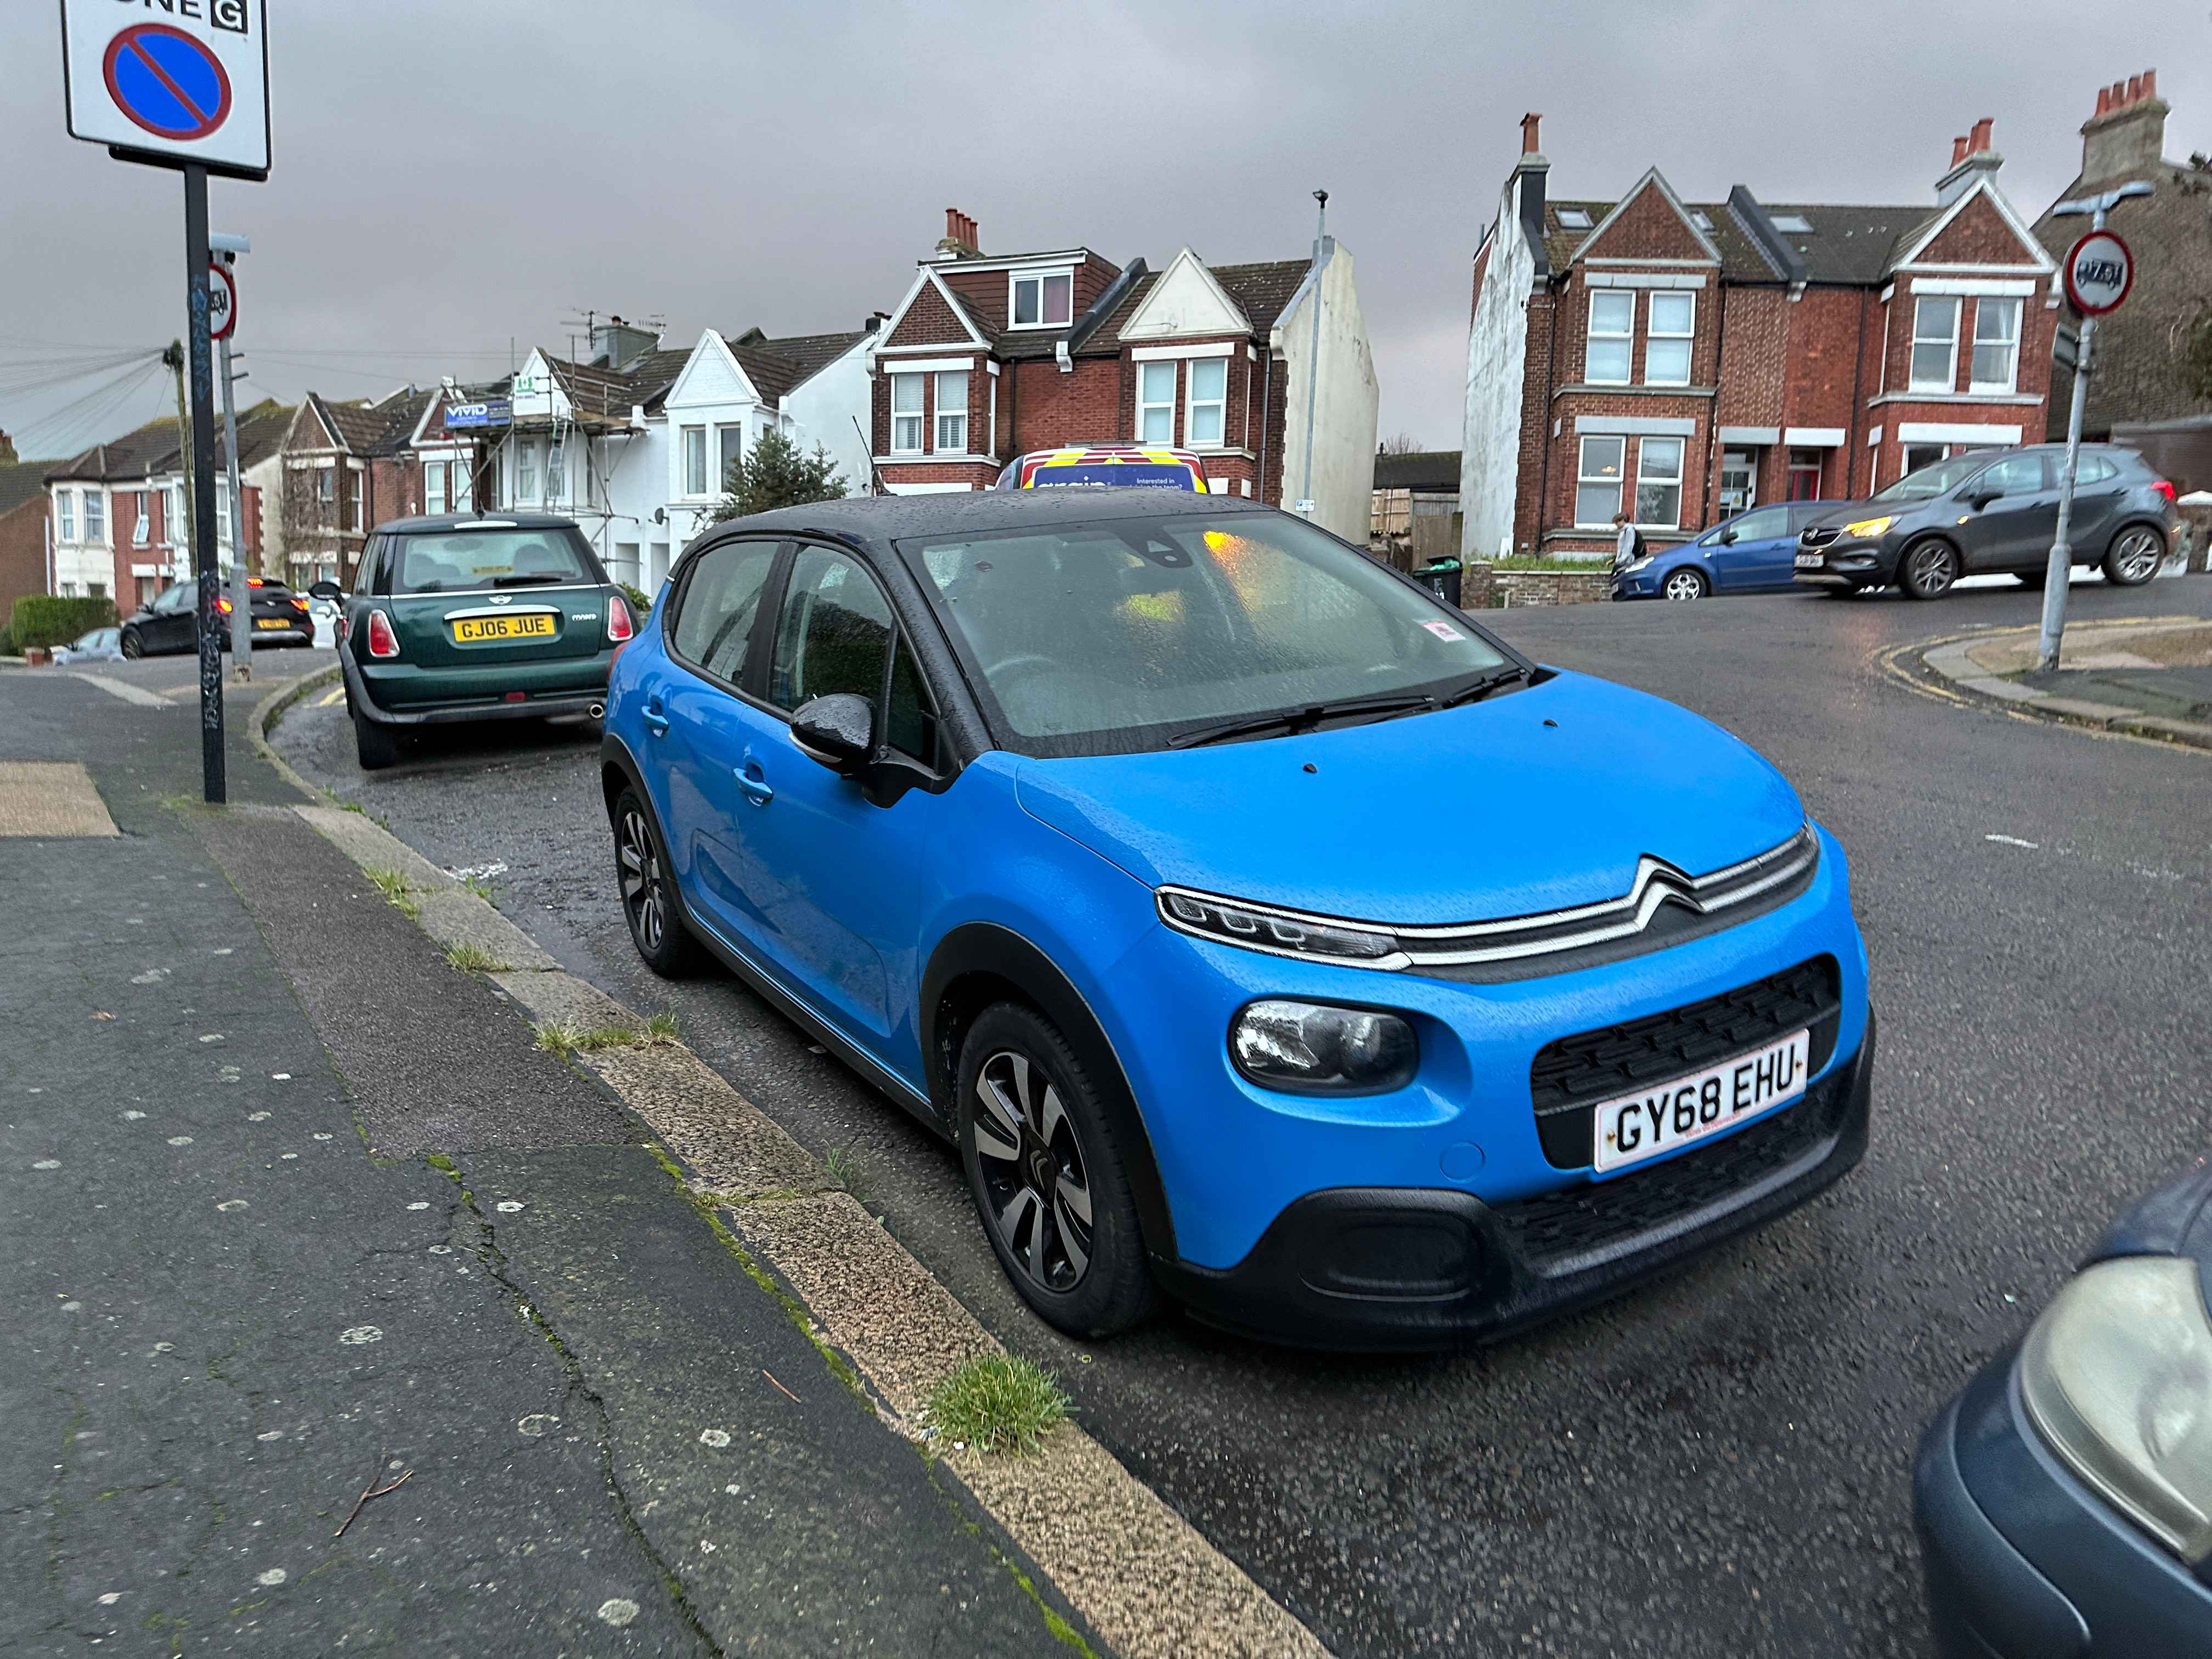 Photograph of GY68 EHU - a Blue Citroen C3 parked in Hollingdean by a non-resident who uses the local area as part of their Brighton commute. The ninth of twelve photographs supplied by the residents of Hollingdean.